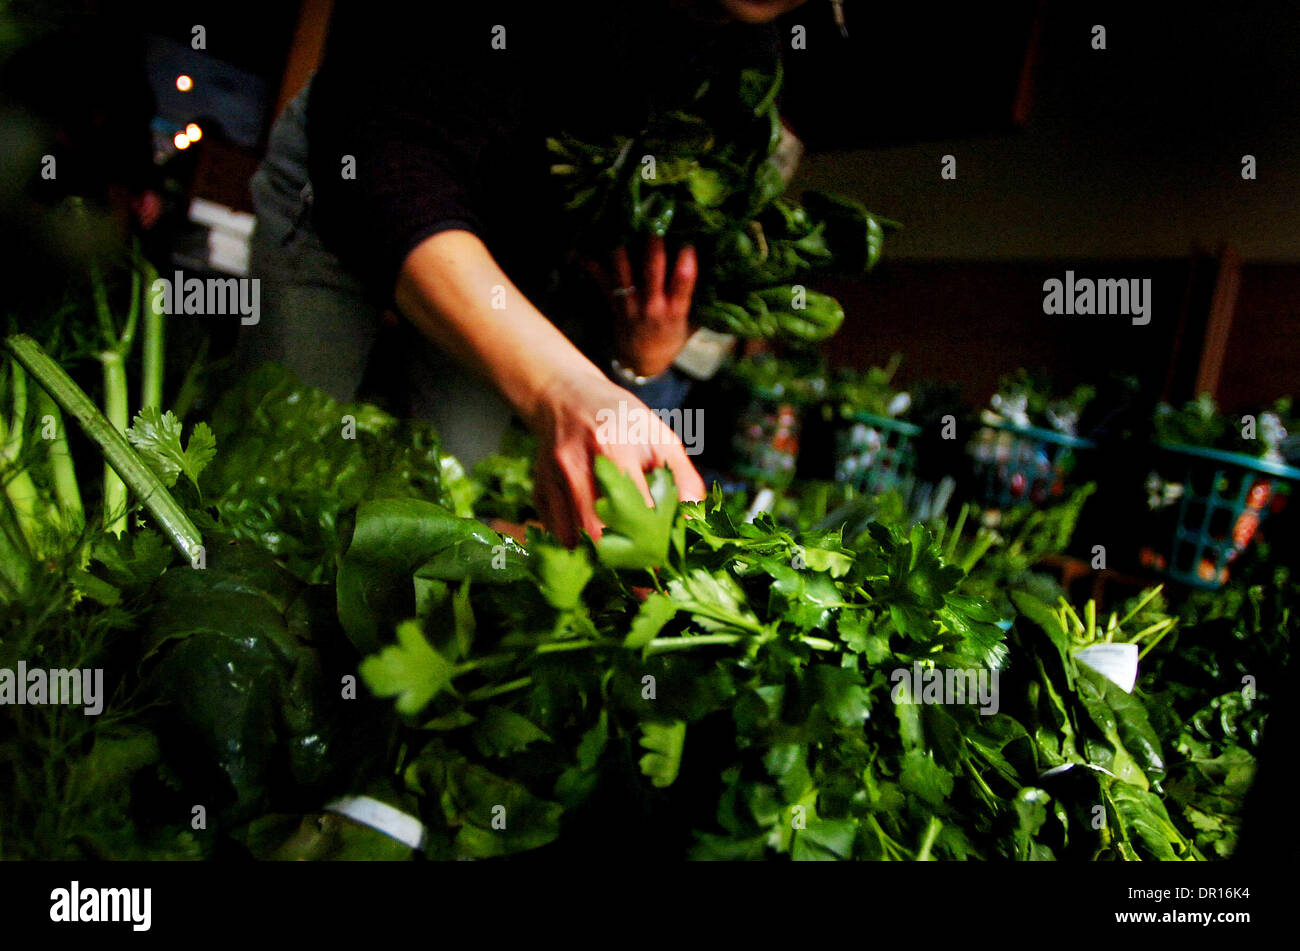 Jan 03, 2009 - Redlands, California, USA - Organizers and volunteers for the Inland Empire Organic Produce Buying Club sort veggies to be picked up by co-op participants in front of The Farm Artisian Restaurant in Redlands. (Credit Image: © Eric Reed/ZUMA Press) Stock Photo